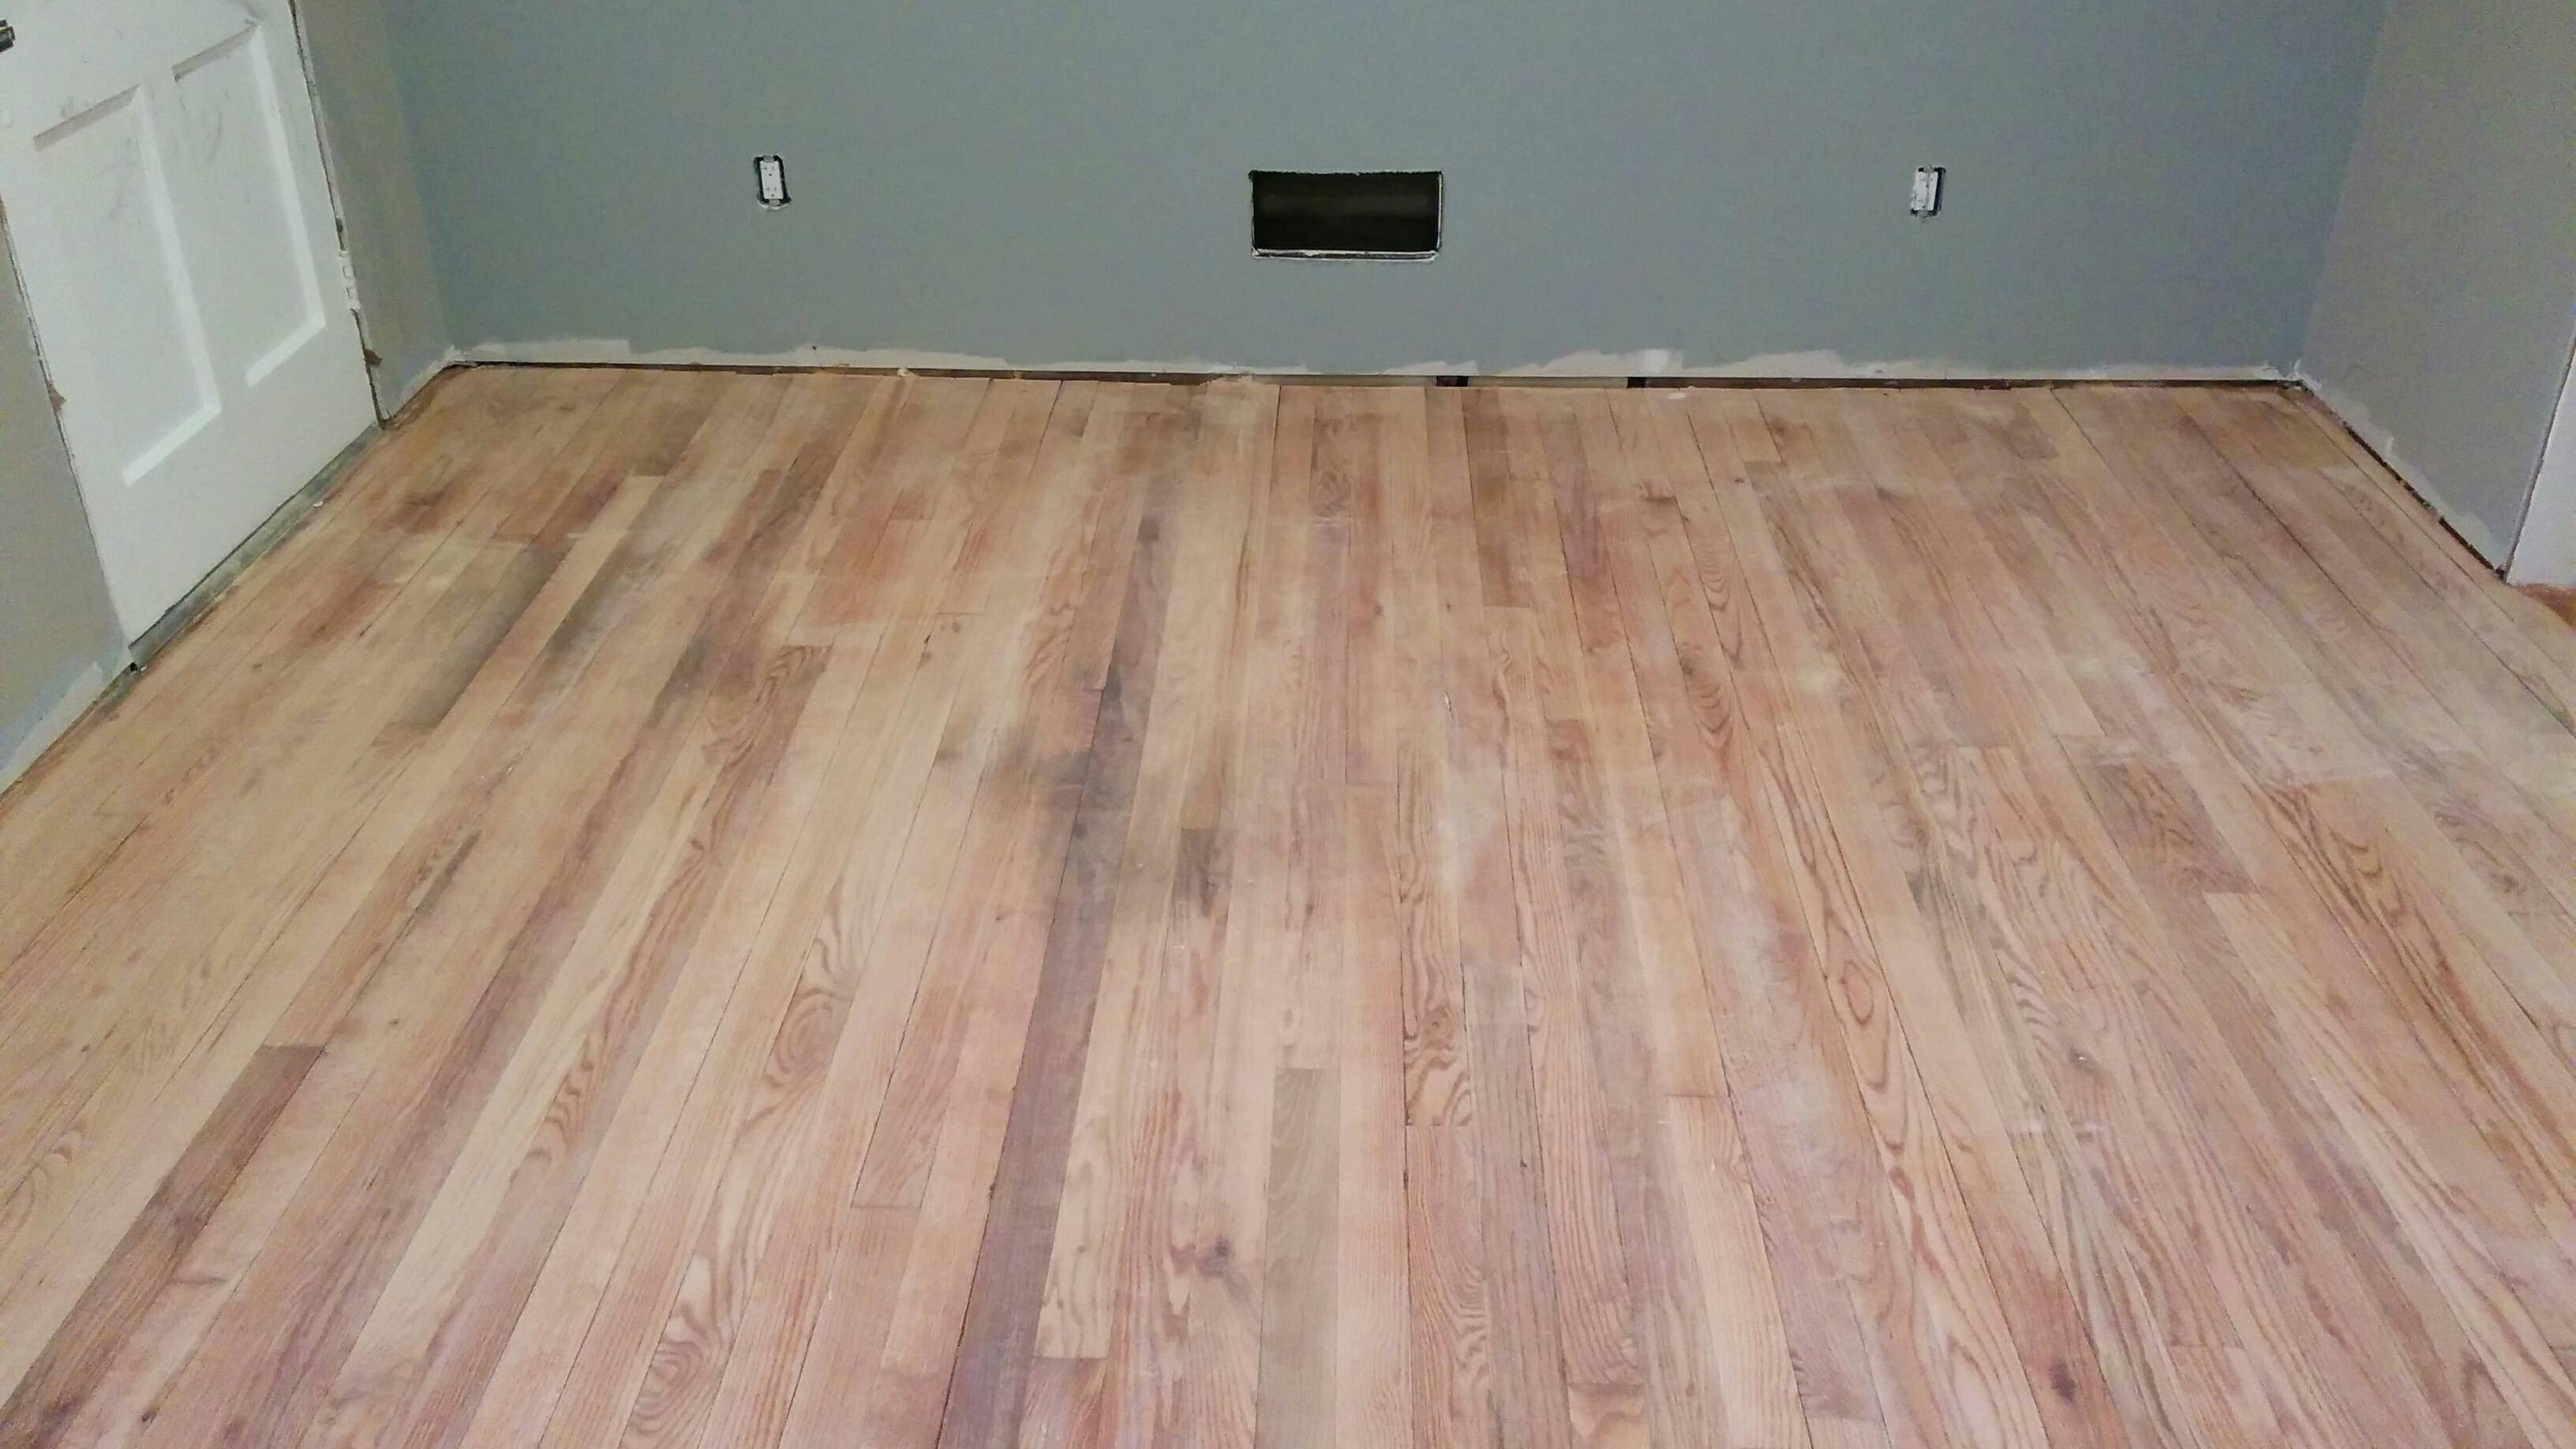 14 attractive Hardwood Floor Refinishing Price Per Sqft 2024 free download hardwood floor refinishing price per sqft of bnudr price for sanding and refinishing hardwood floors sesa build com inside bnudr price for sanding and refinishing hardwood floors